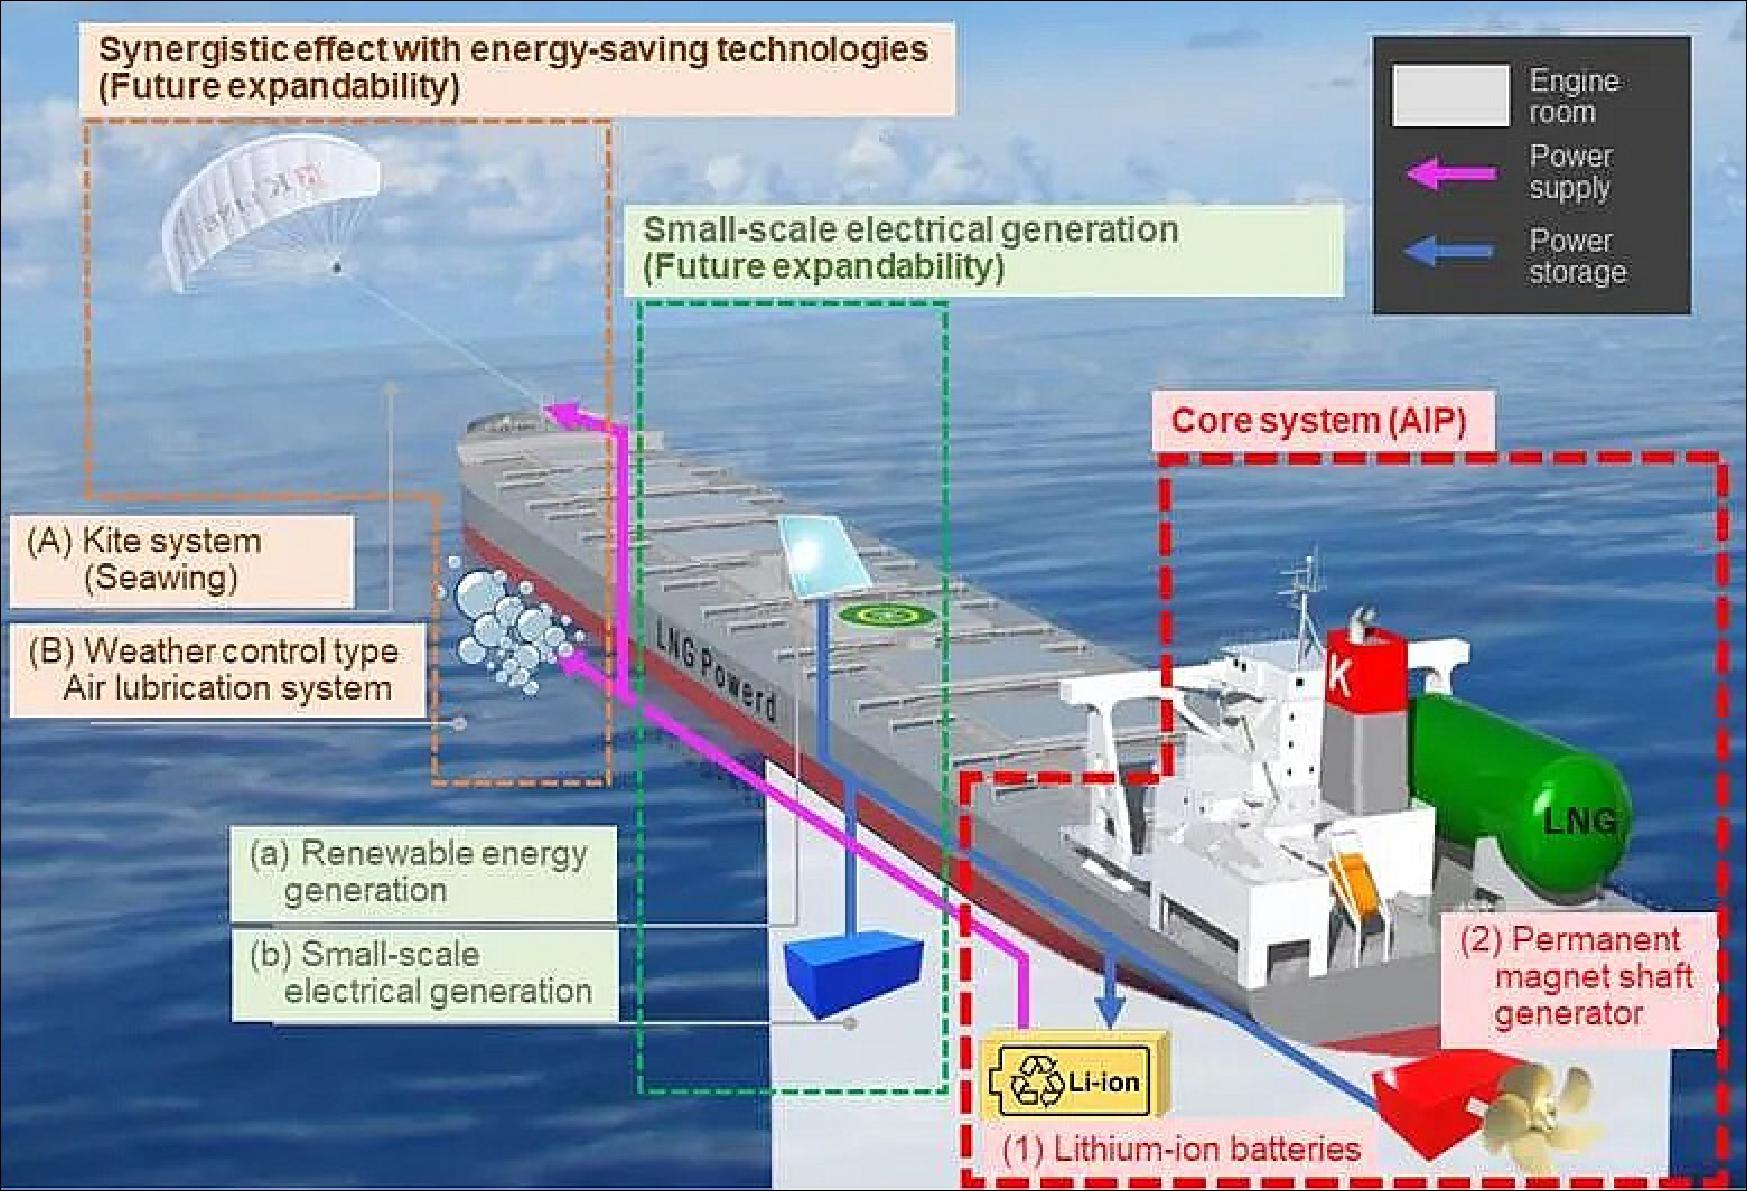 Figure 35: The next-generation bulk carrier. Kawasaki Kisen Kaisha (K LINE) has jointly developed two conceptual designs for LNG-fuelled and battery-powered energy-saving bulk carriers. The carriers have also obtained Approvals in Principle (AIP) from ClassNK (image credit: K Line)